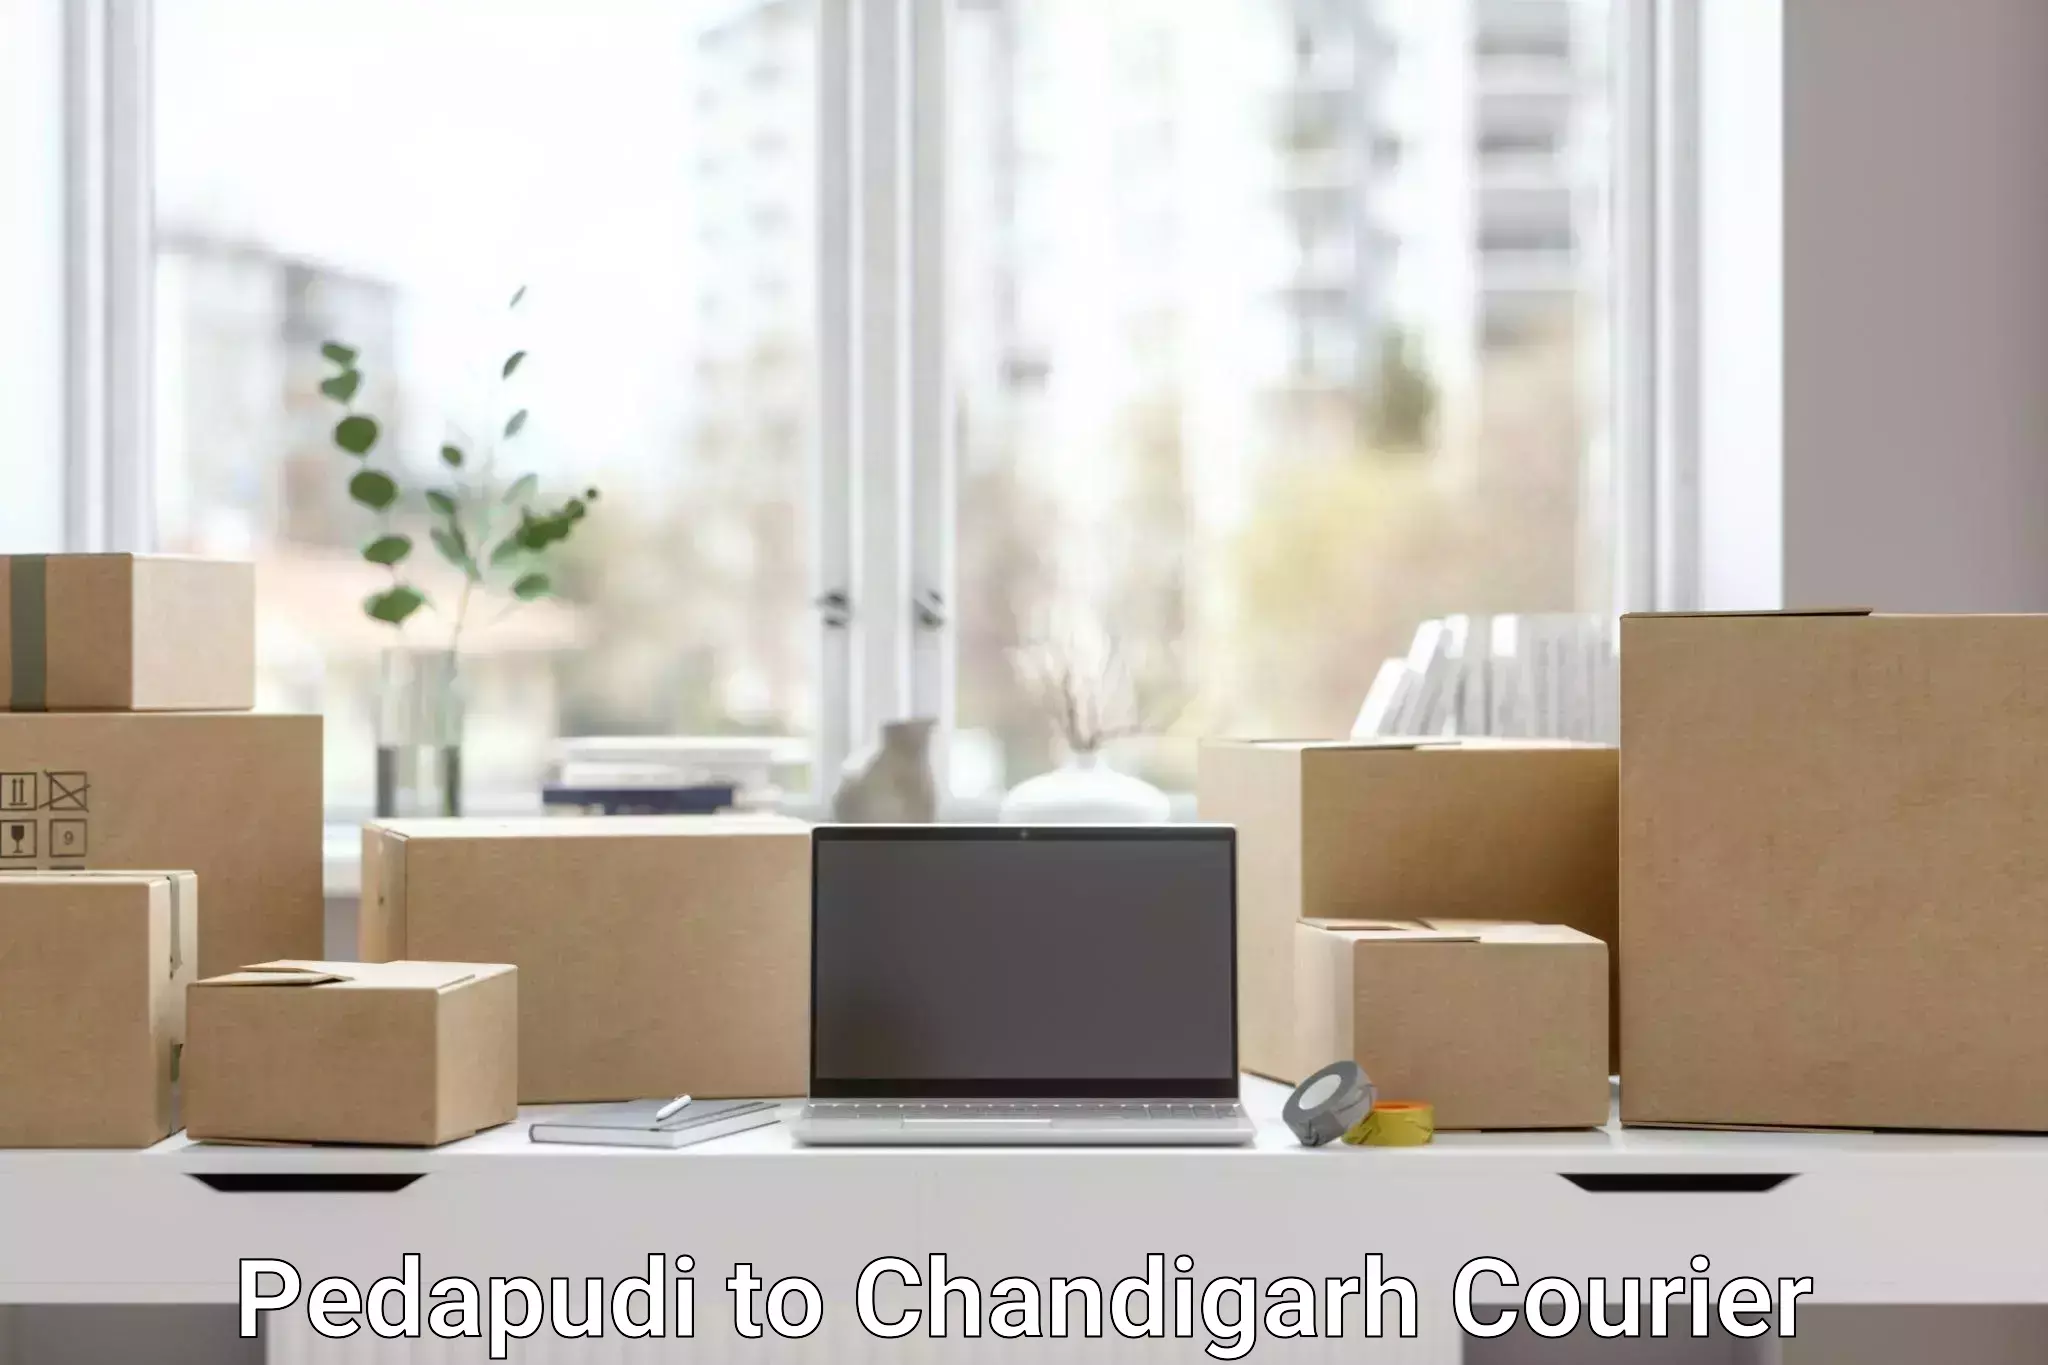 Logistics and distribution in Pedapudi to Chandigarh